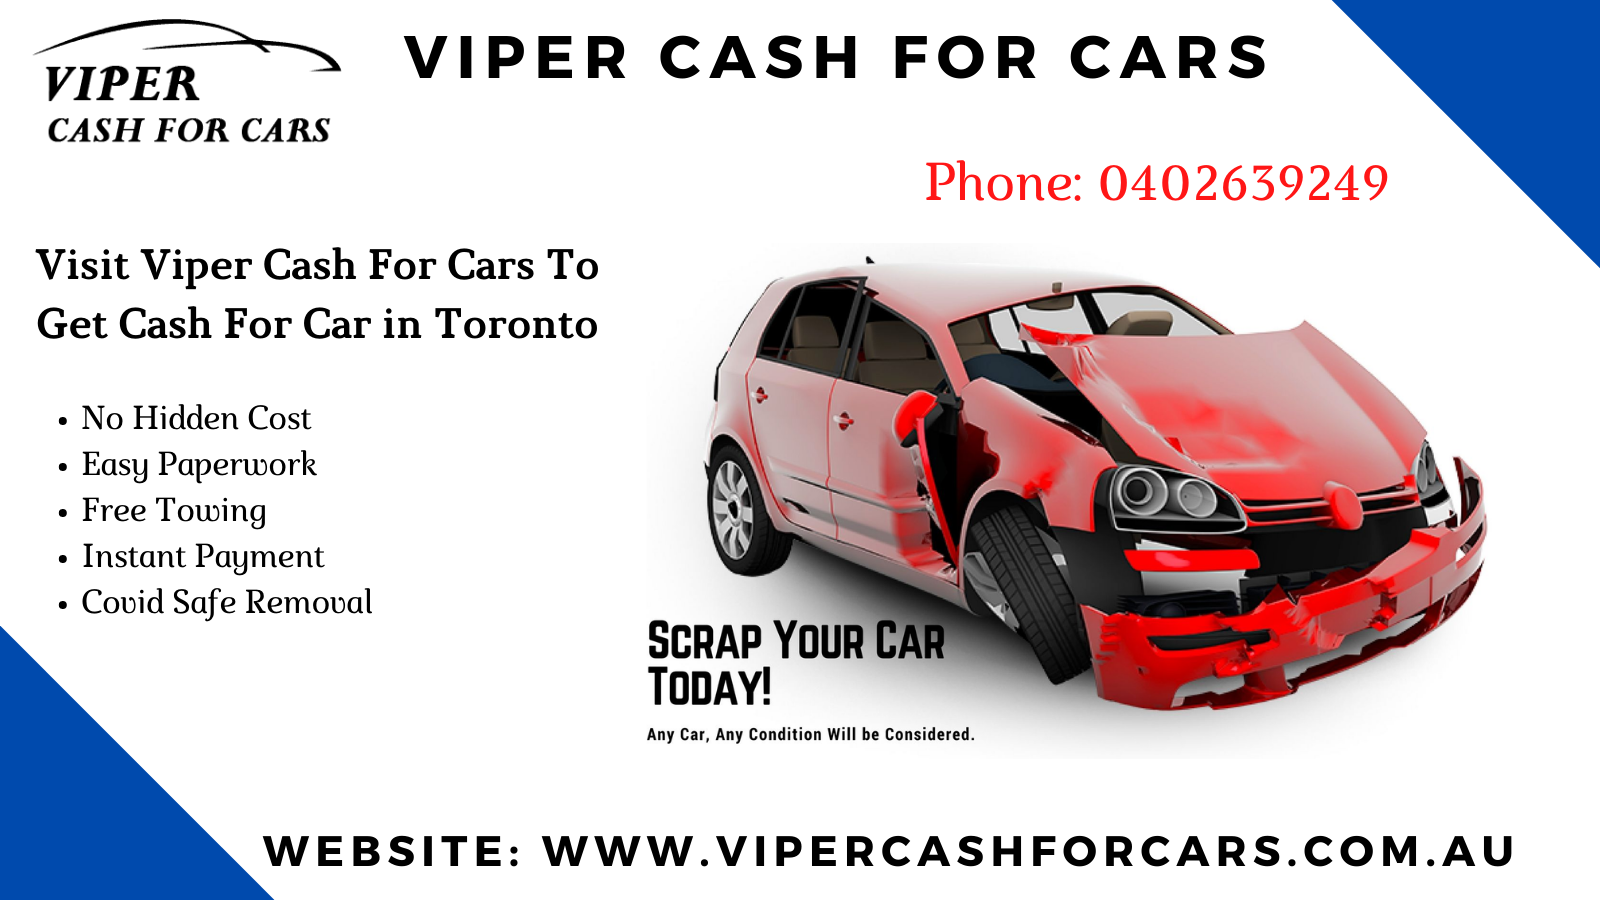 Visit Viper Cash For Cars To Get Cash For Car in Toronto